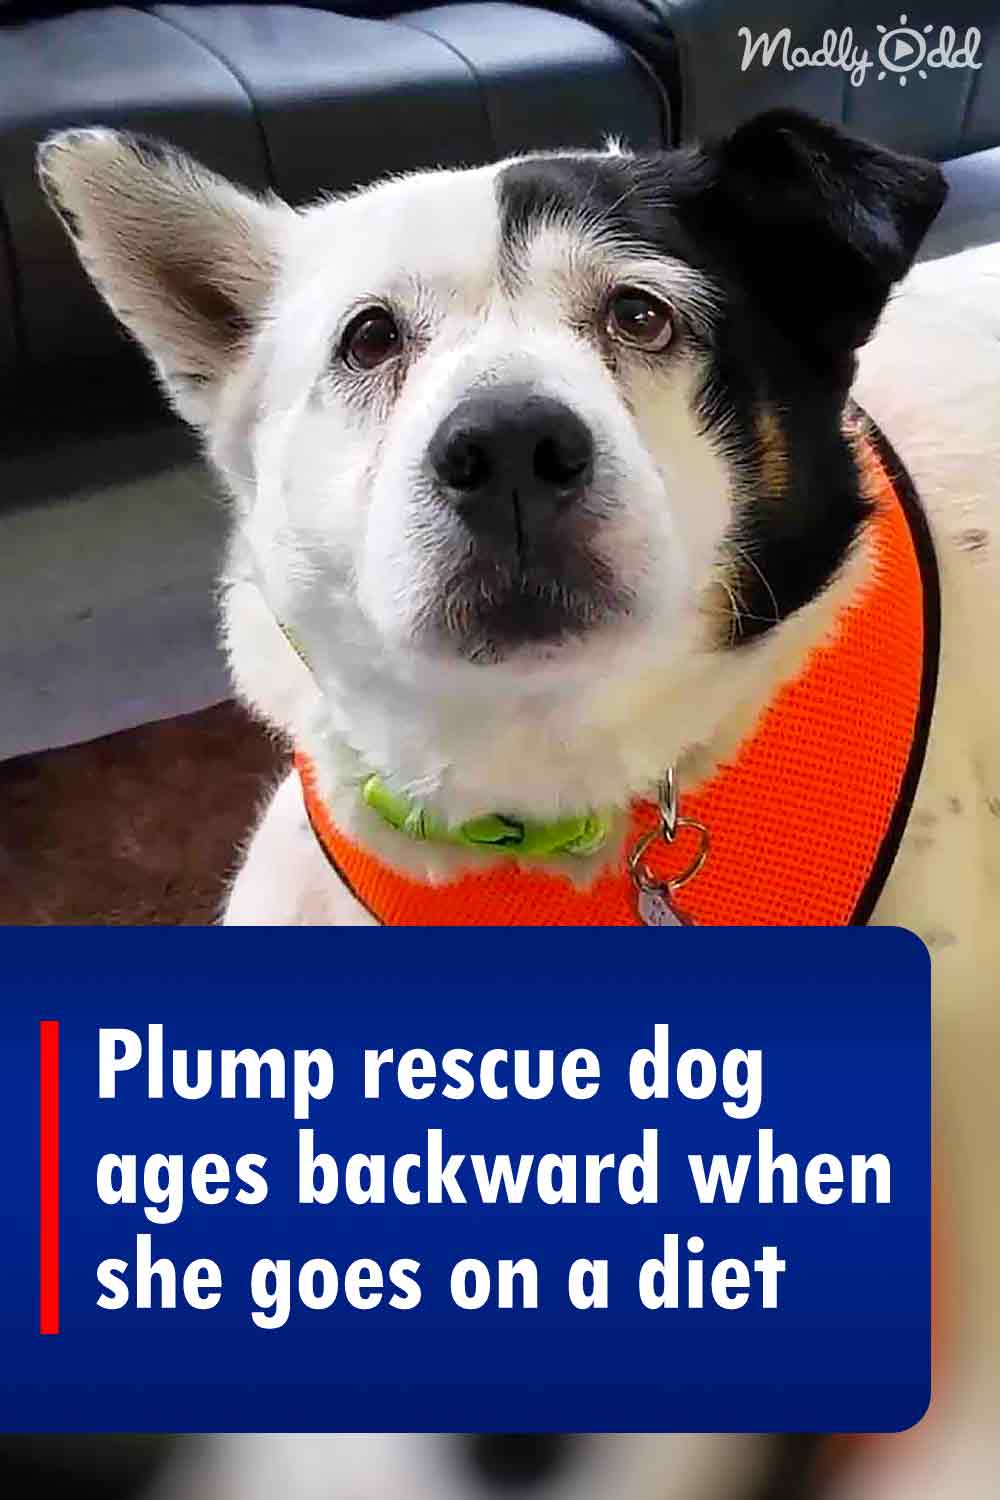 Plump rescue dog ages backward when she goes on a diet